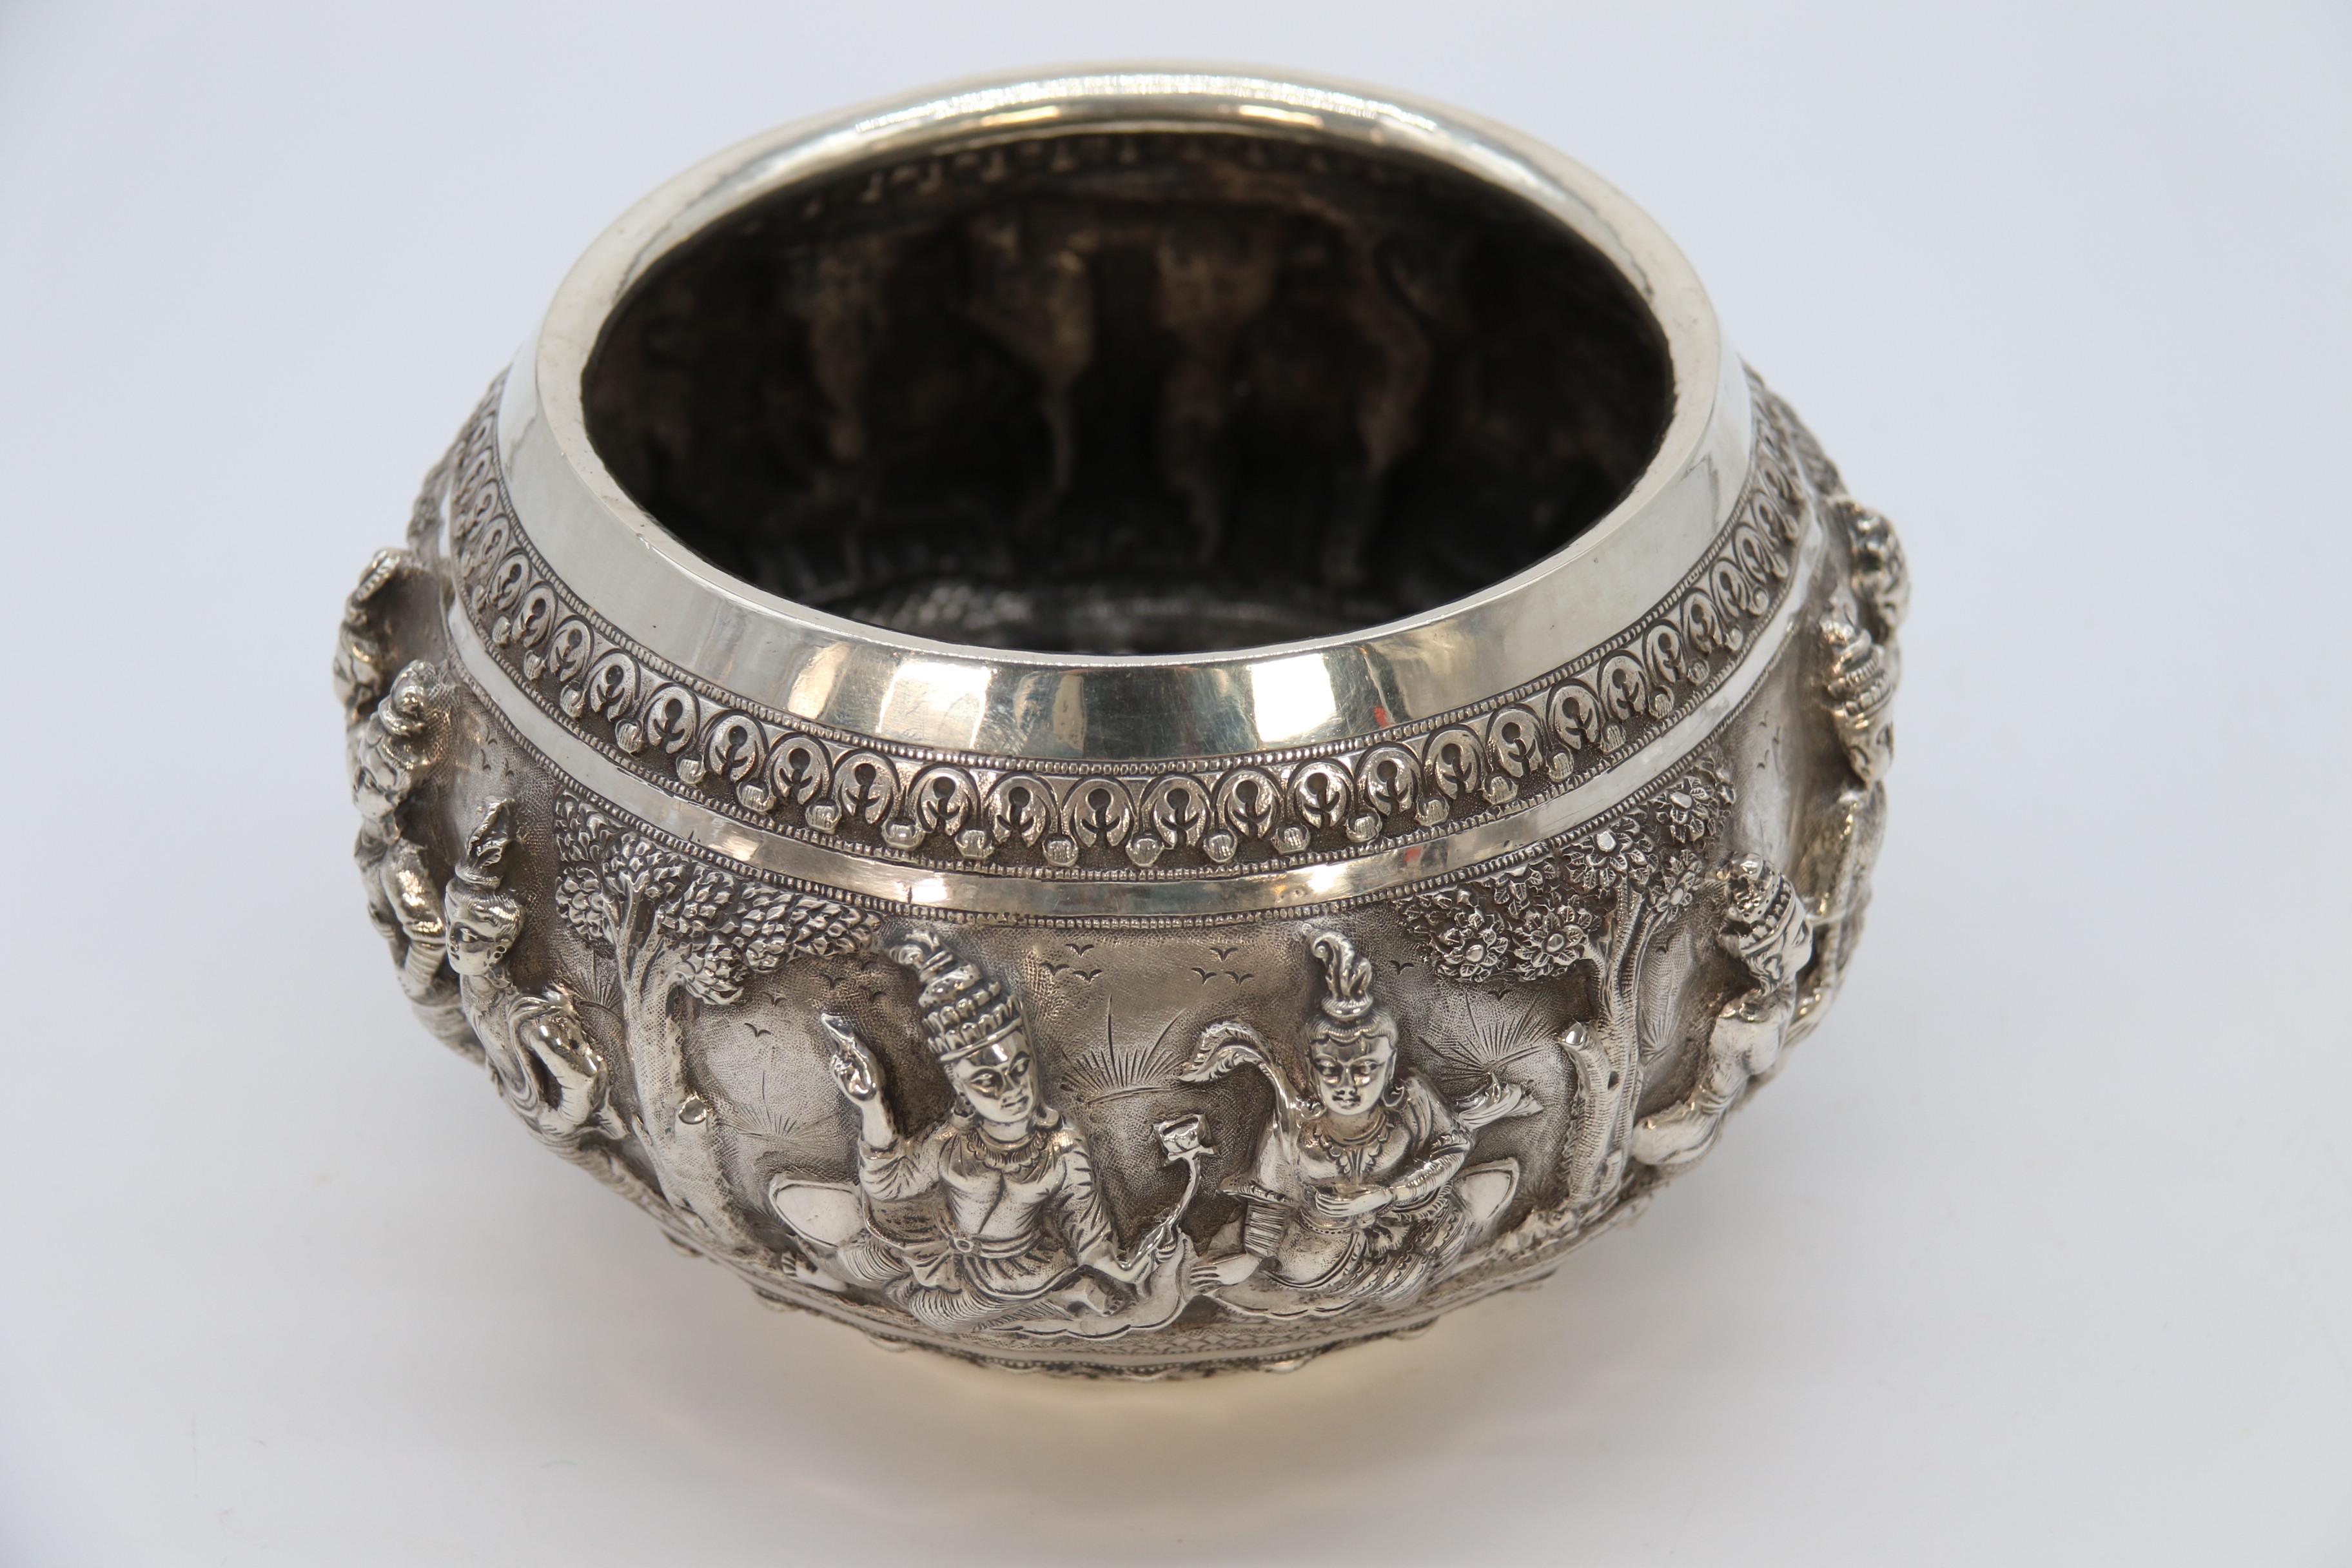 19th century Indian silver Raj period deep relief repousse work bowl circa 1870 For Sale 4